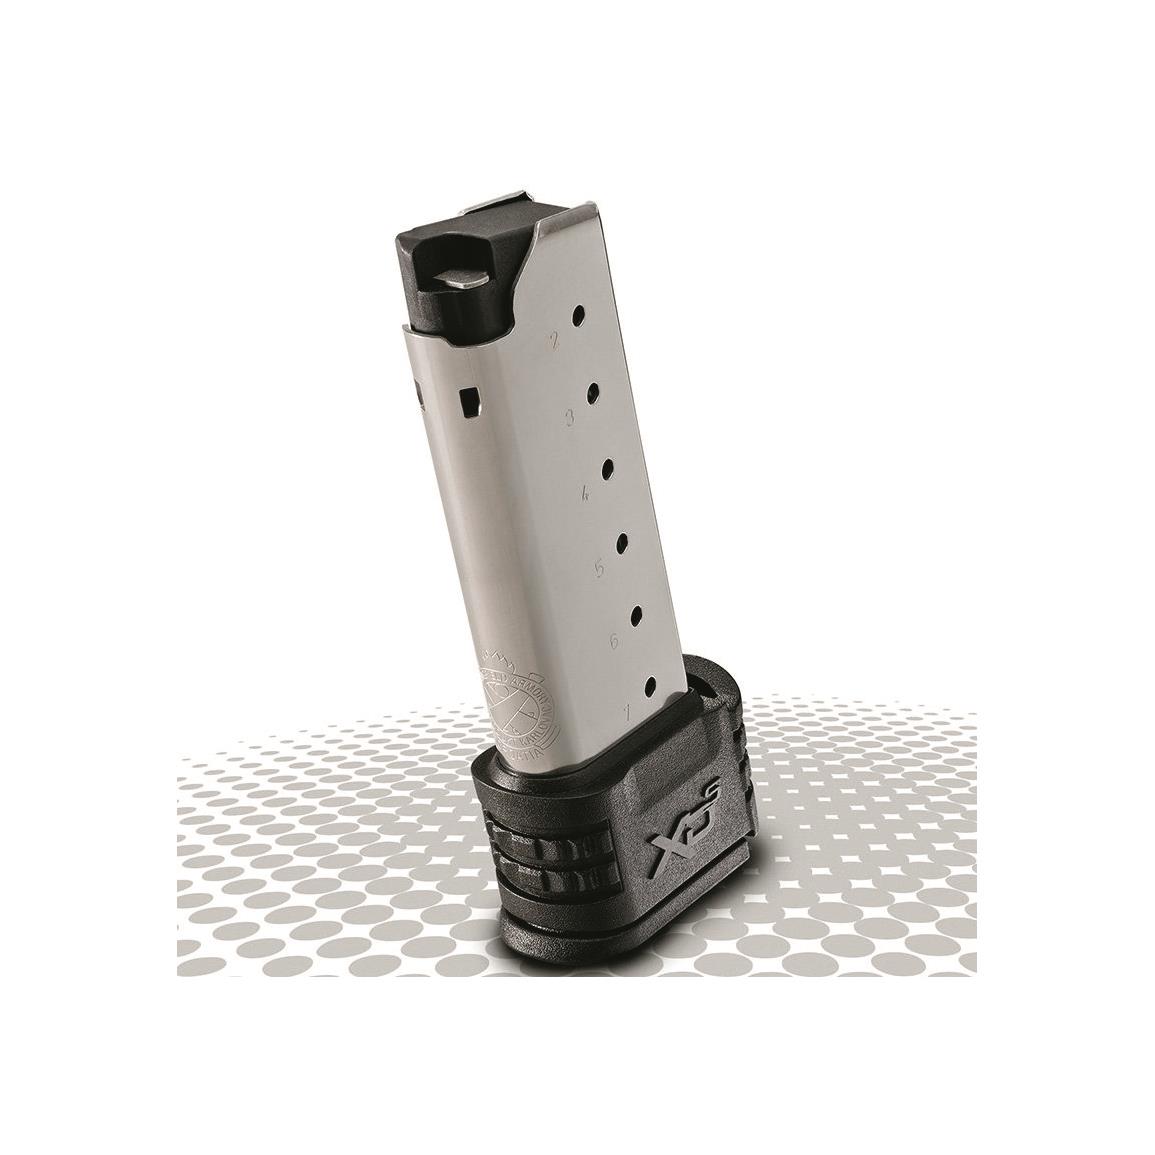 xds 45 extended magazine